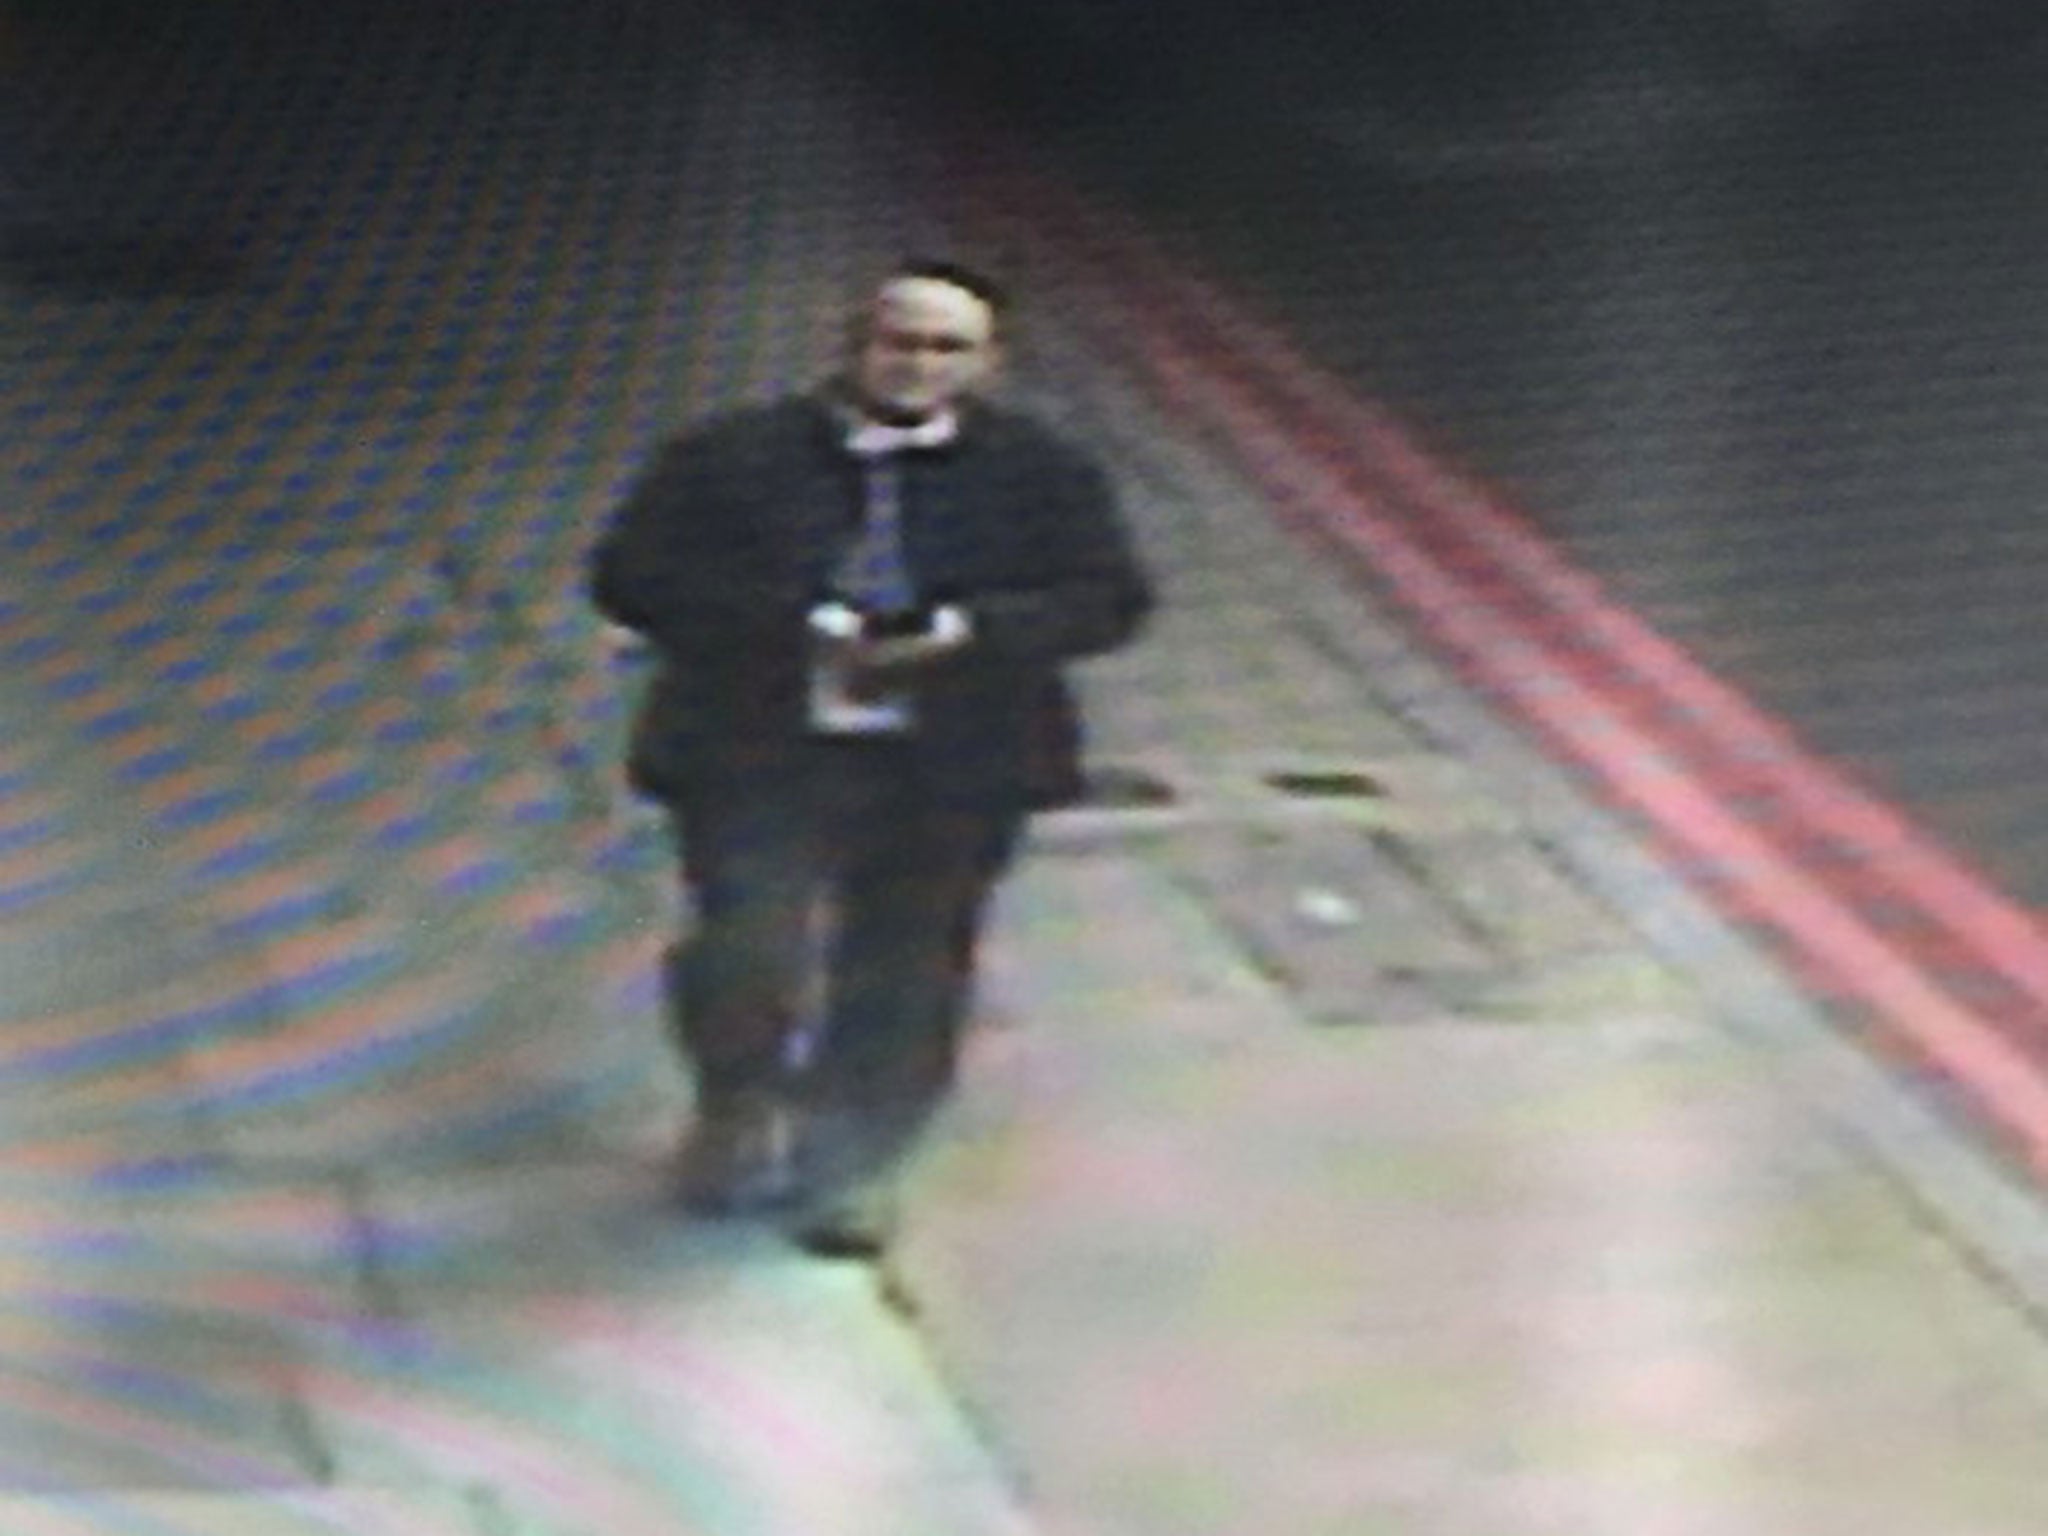 PC Gordon Semple was last seen on CCTV in Great Guildford Street near London Bridge at 3pm on Friday, he can be seen looking at his mobile telephone, but not making or receiving a call